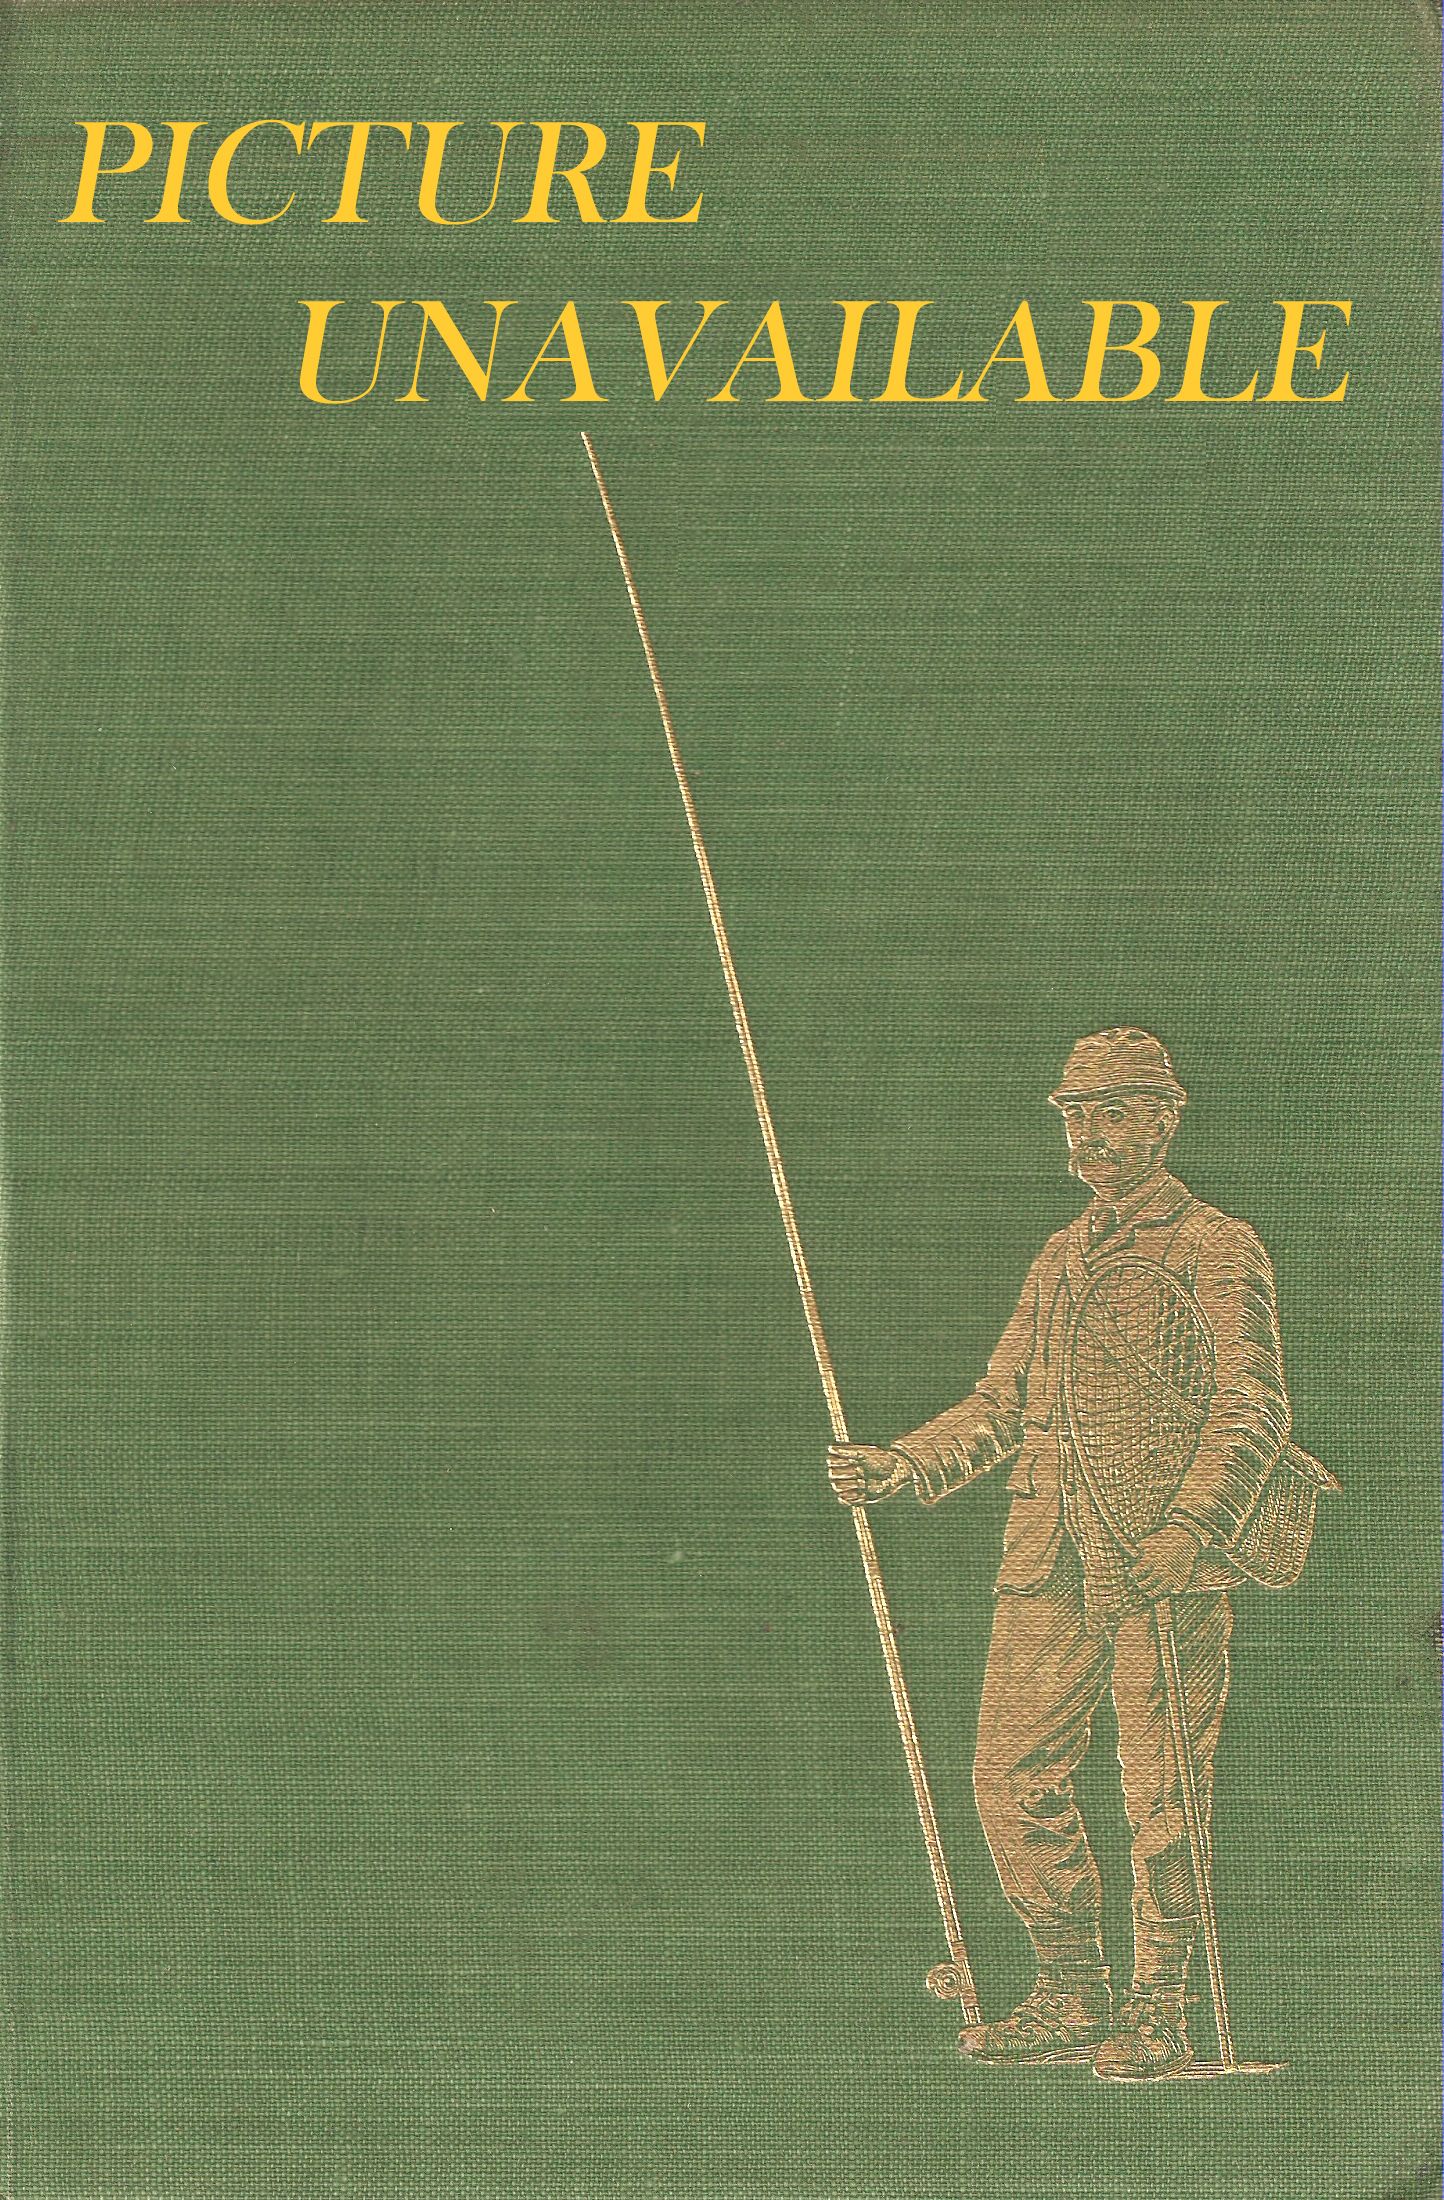 LOCH FISHING: SOME GENERAL HINTS ON METHODS. By W.J. Cummins, Fishing  Tackle Maker, Bishop Auckland.